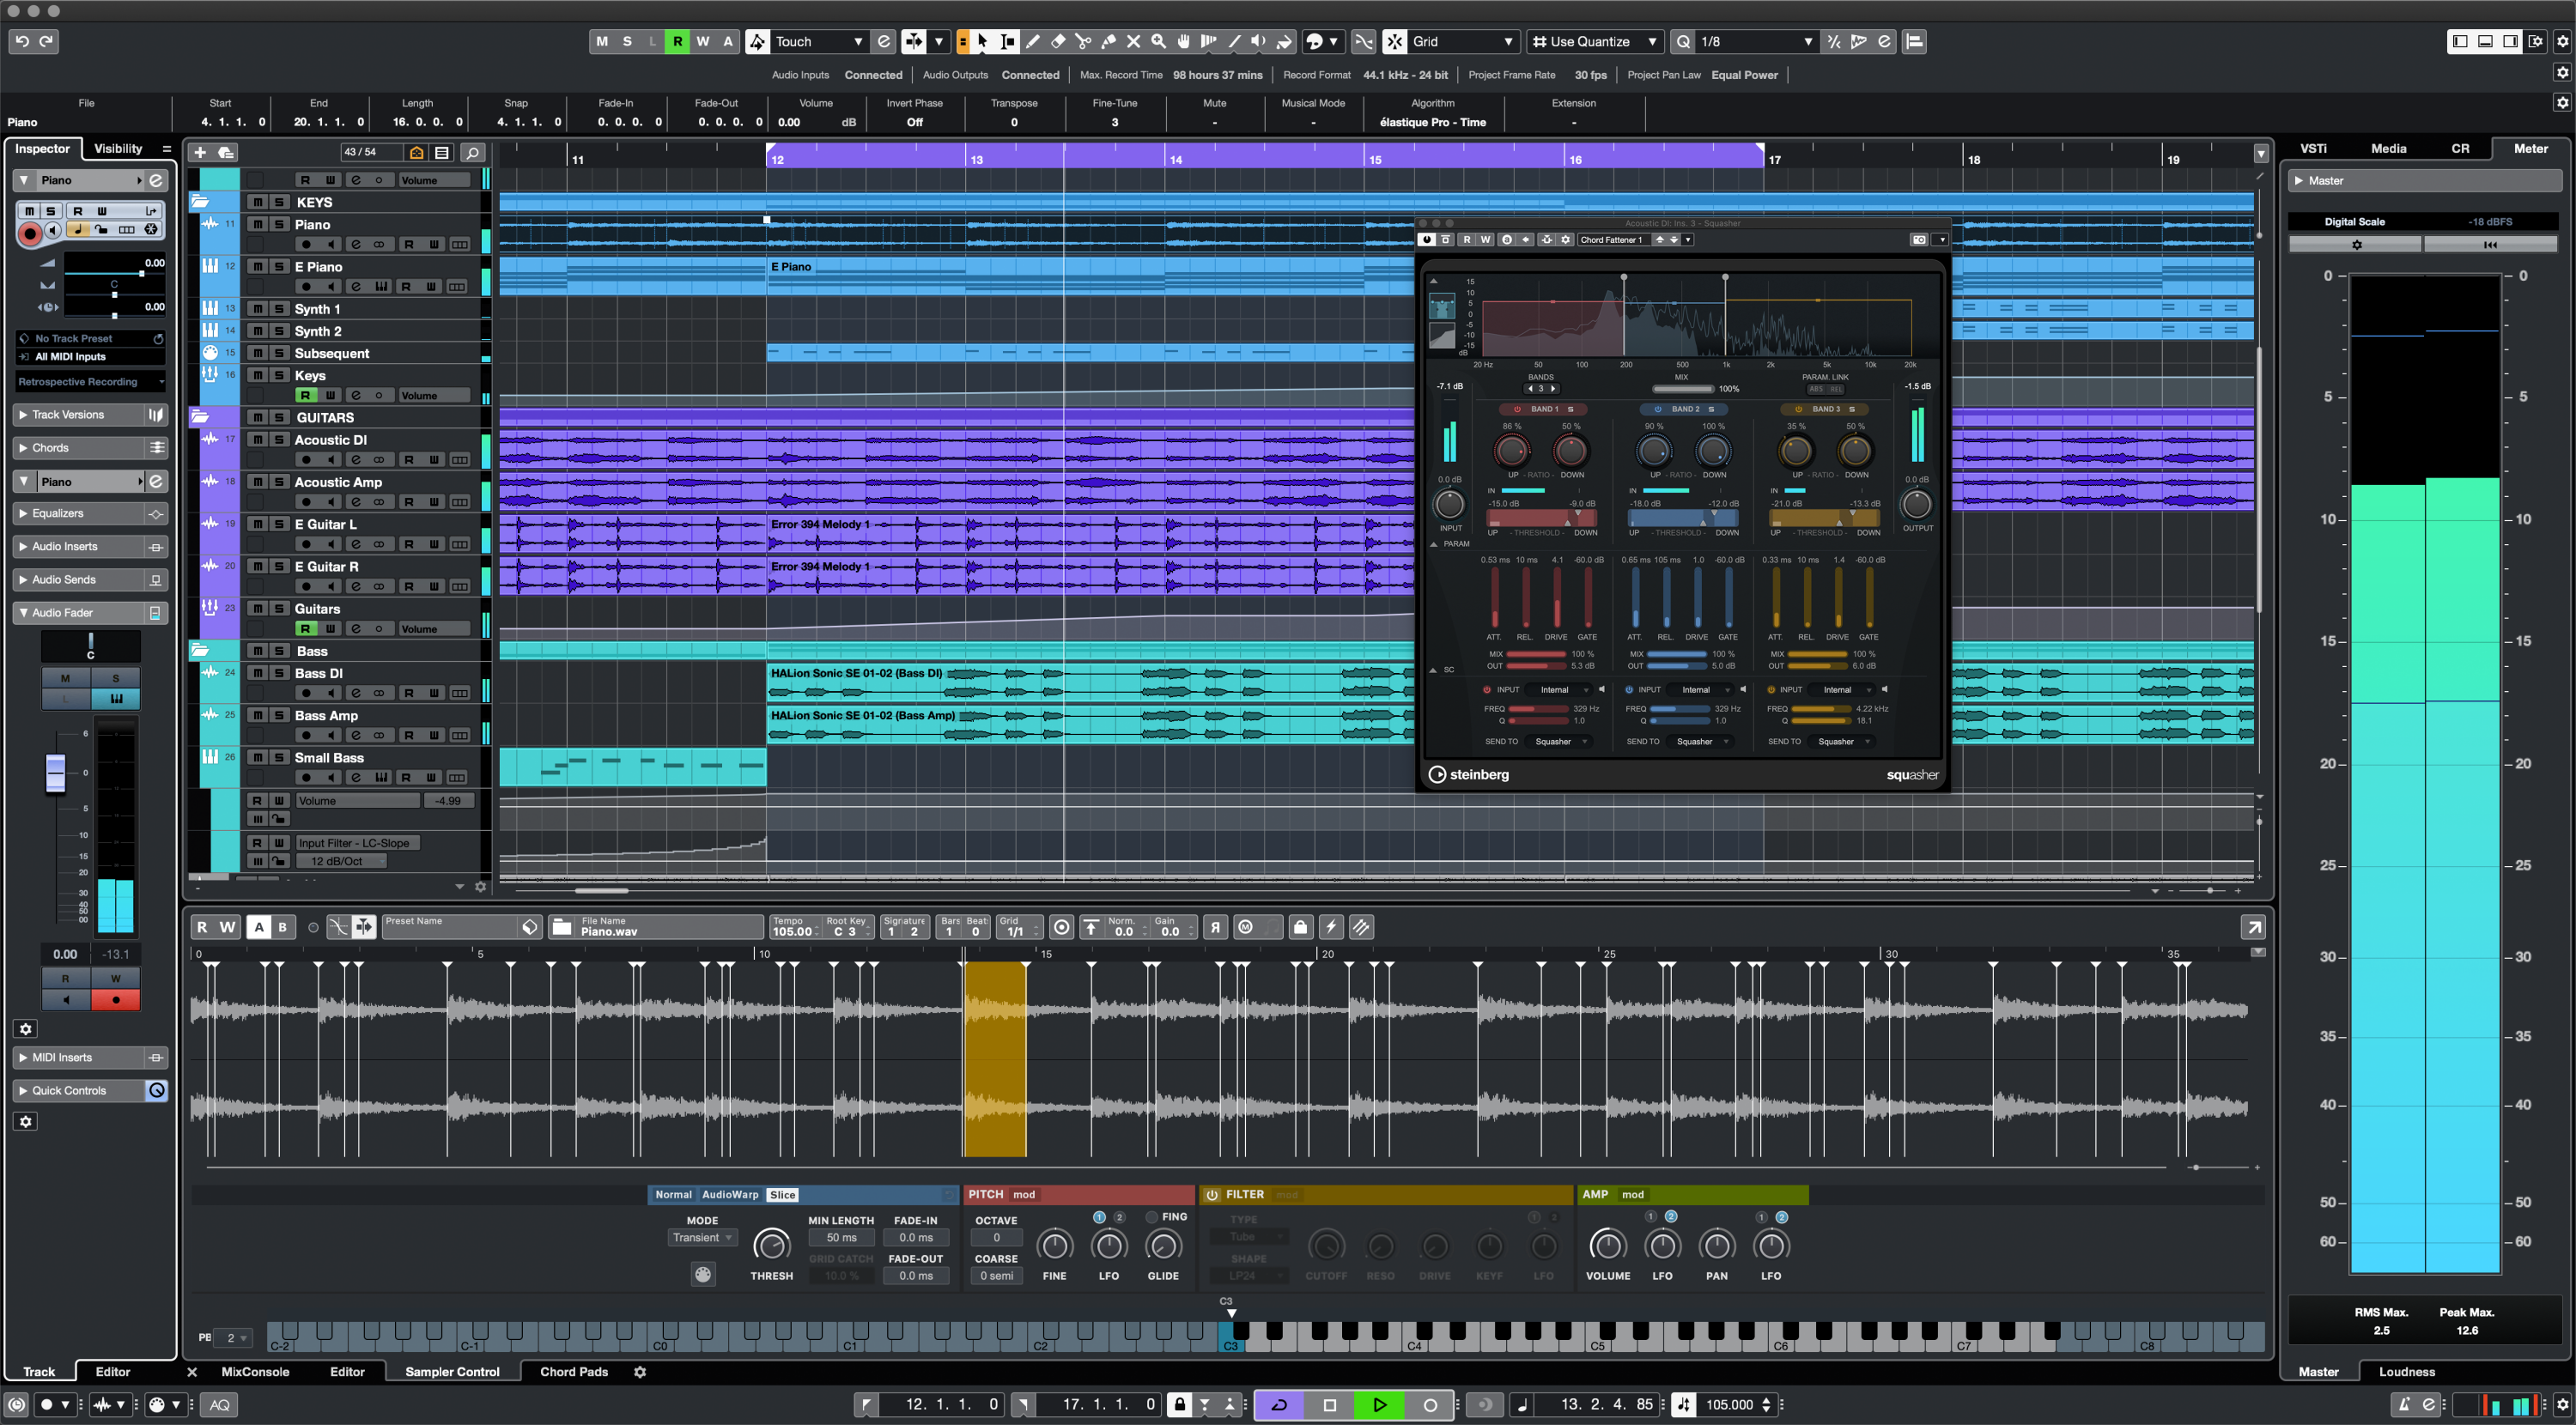 Steinberg Cubase Pro 11 - Update from Cubase Pro 10.5 (download)